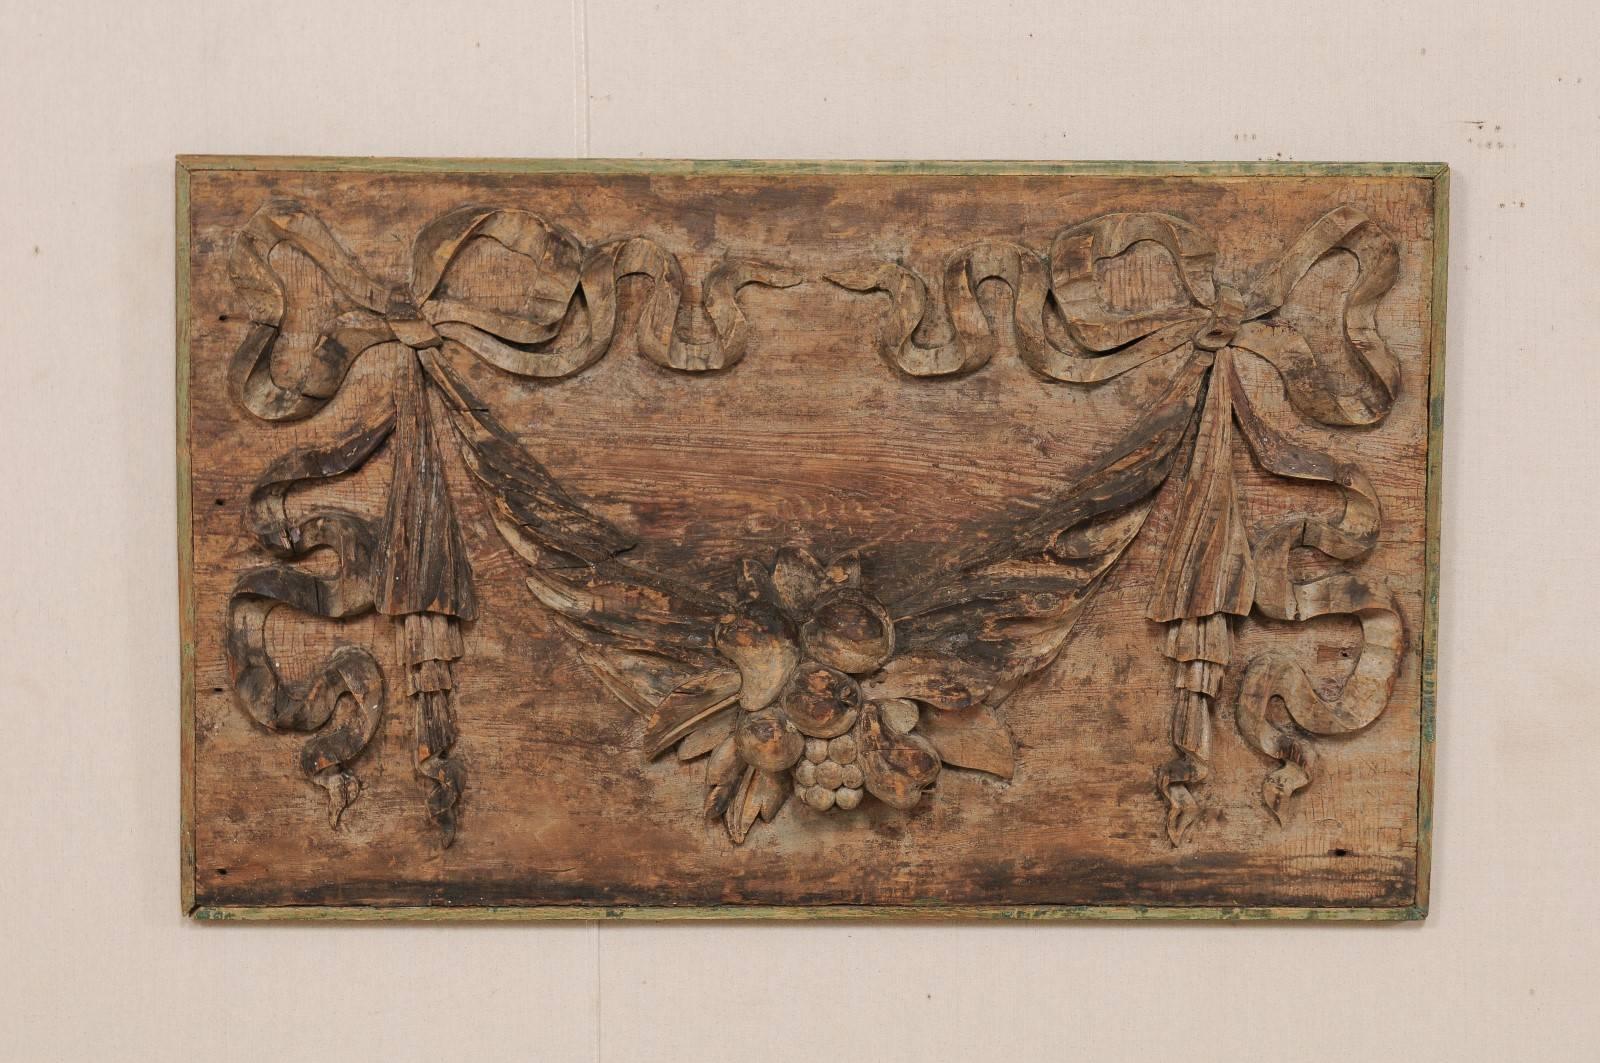 An Italian 19th century hand-carved wood plaque. This lovely Italian wall hanging plaque is oval shaped, made of wood, and features motifs of intricate bowed ribbons at each end with a swagged centrepiece filled with various fruits. This rich wood